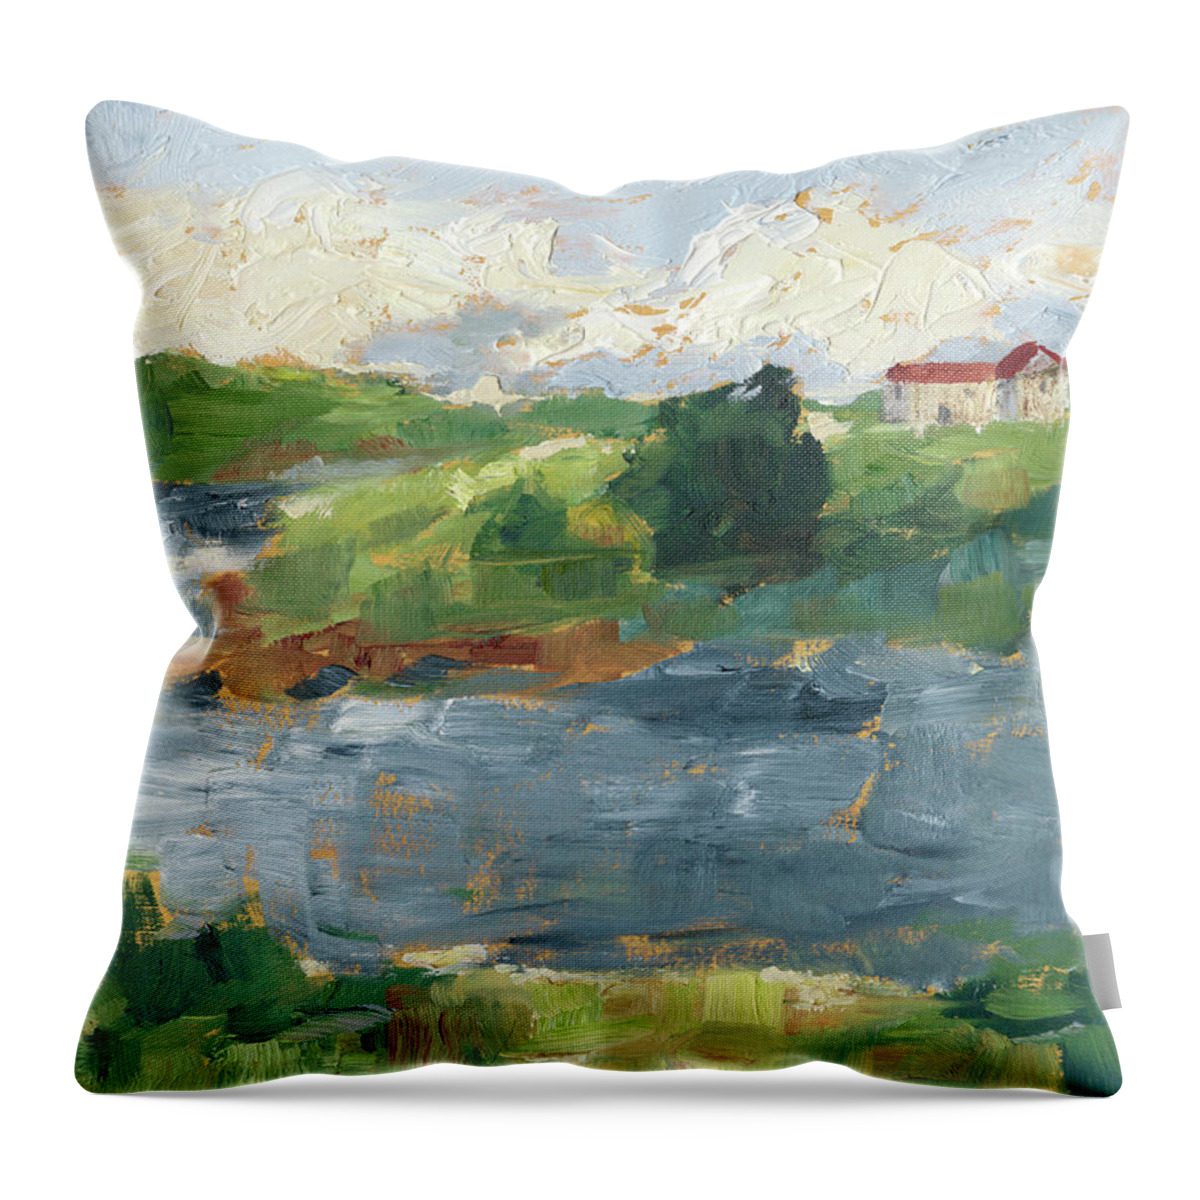 Landscapes & Seascapes+lakes & Rivers Throw Pillow featuring the painting Lakeside Cottages Iv by Ethan Harper